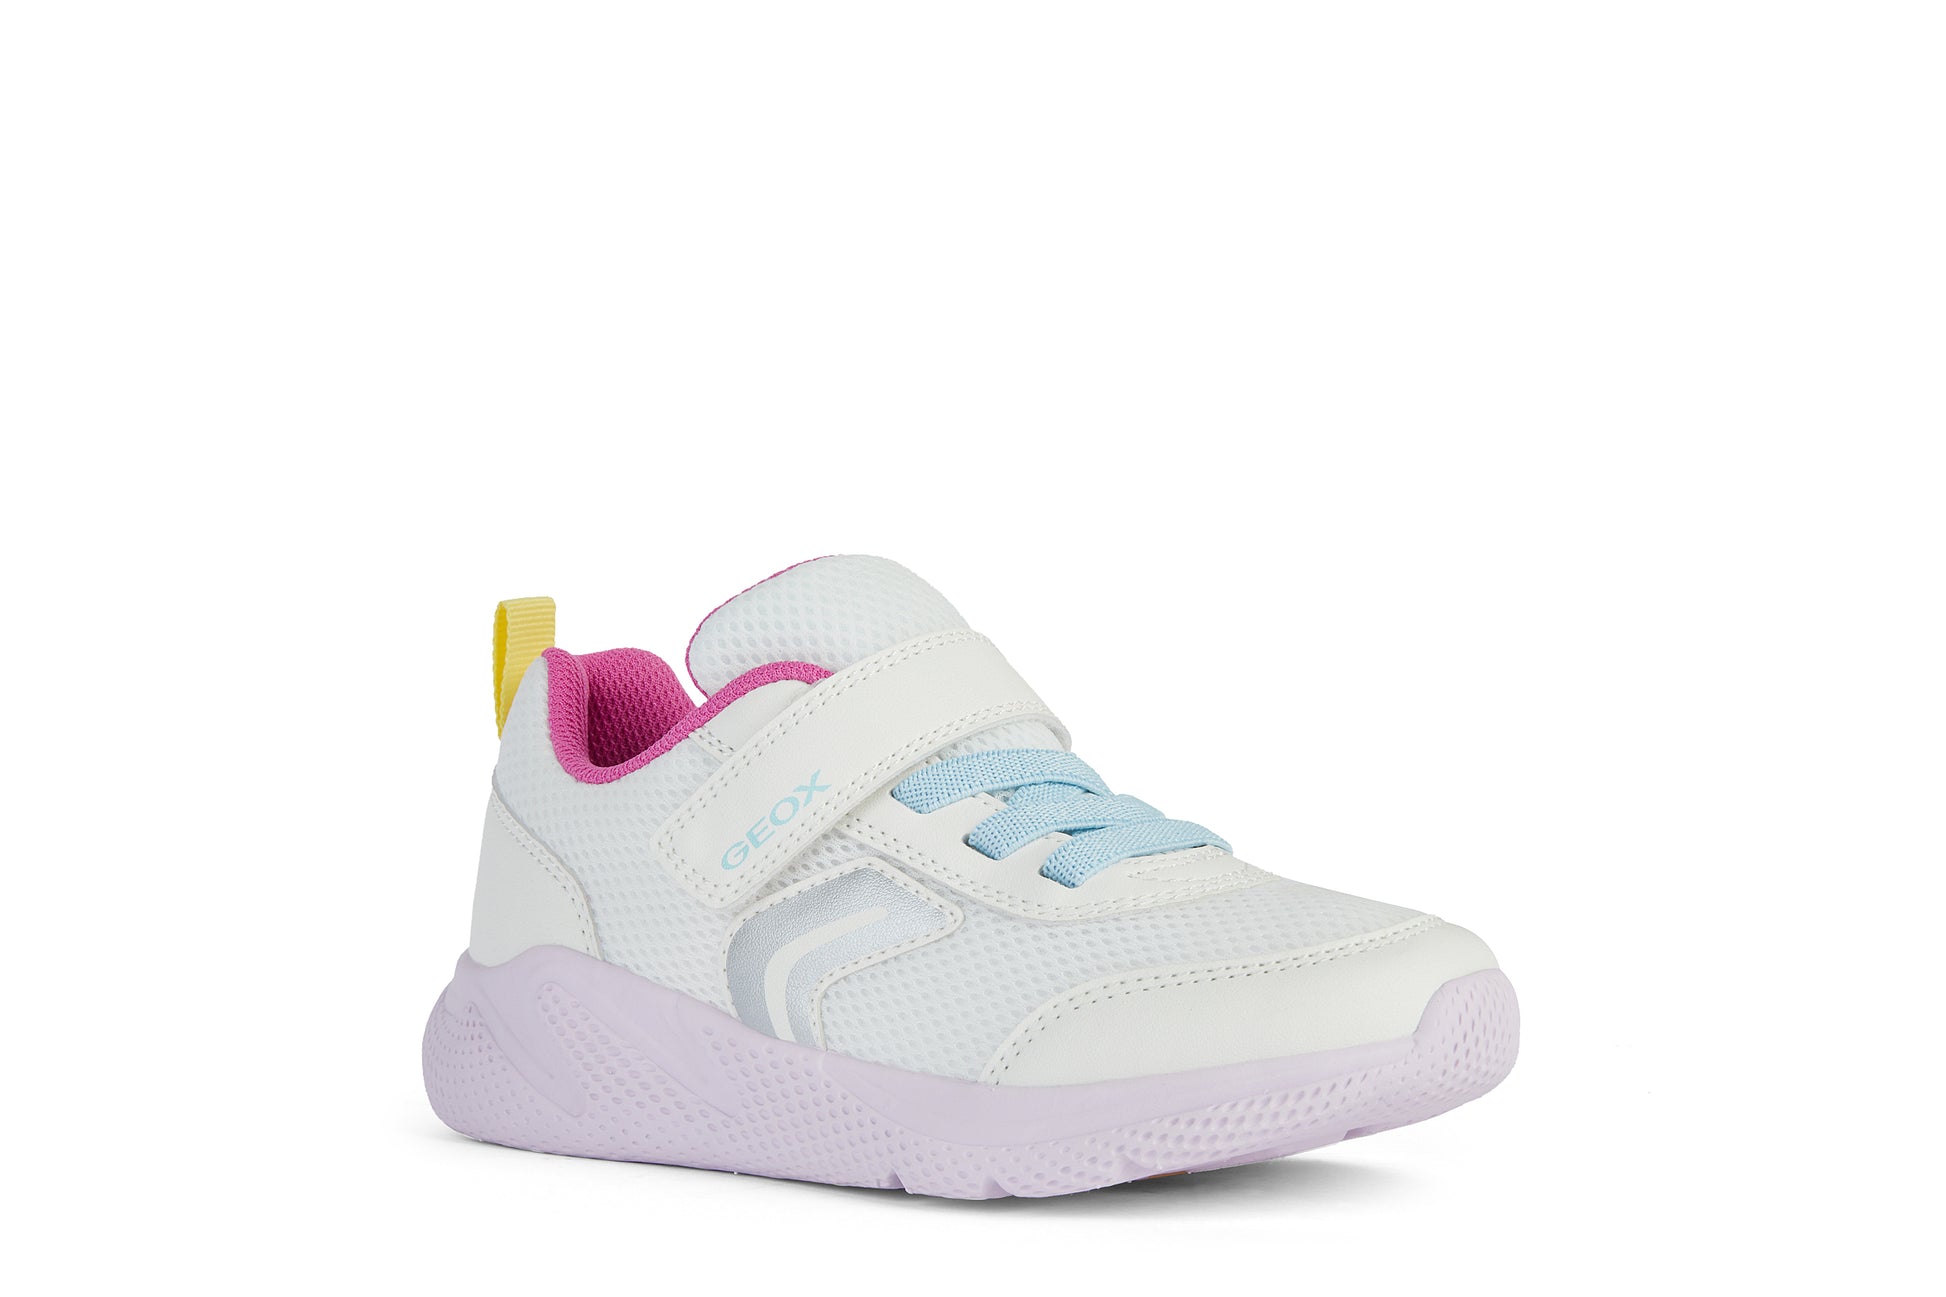 A girls trainer by Geox, style J Sprintye, in white with yellow and pink trim and velcro and blue bungee lace fastening. Angled view of right side.